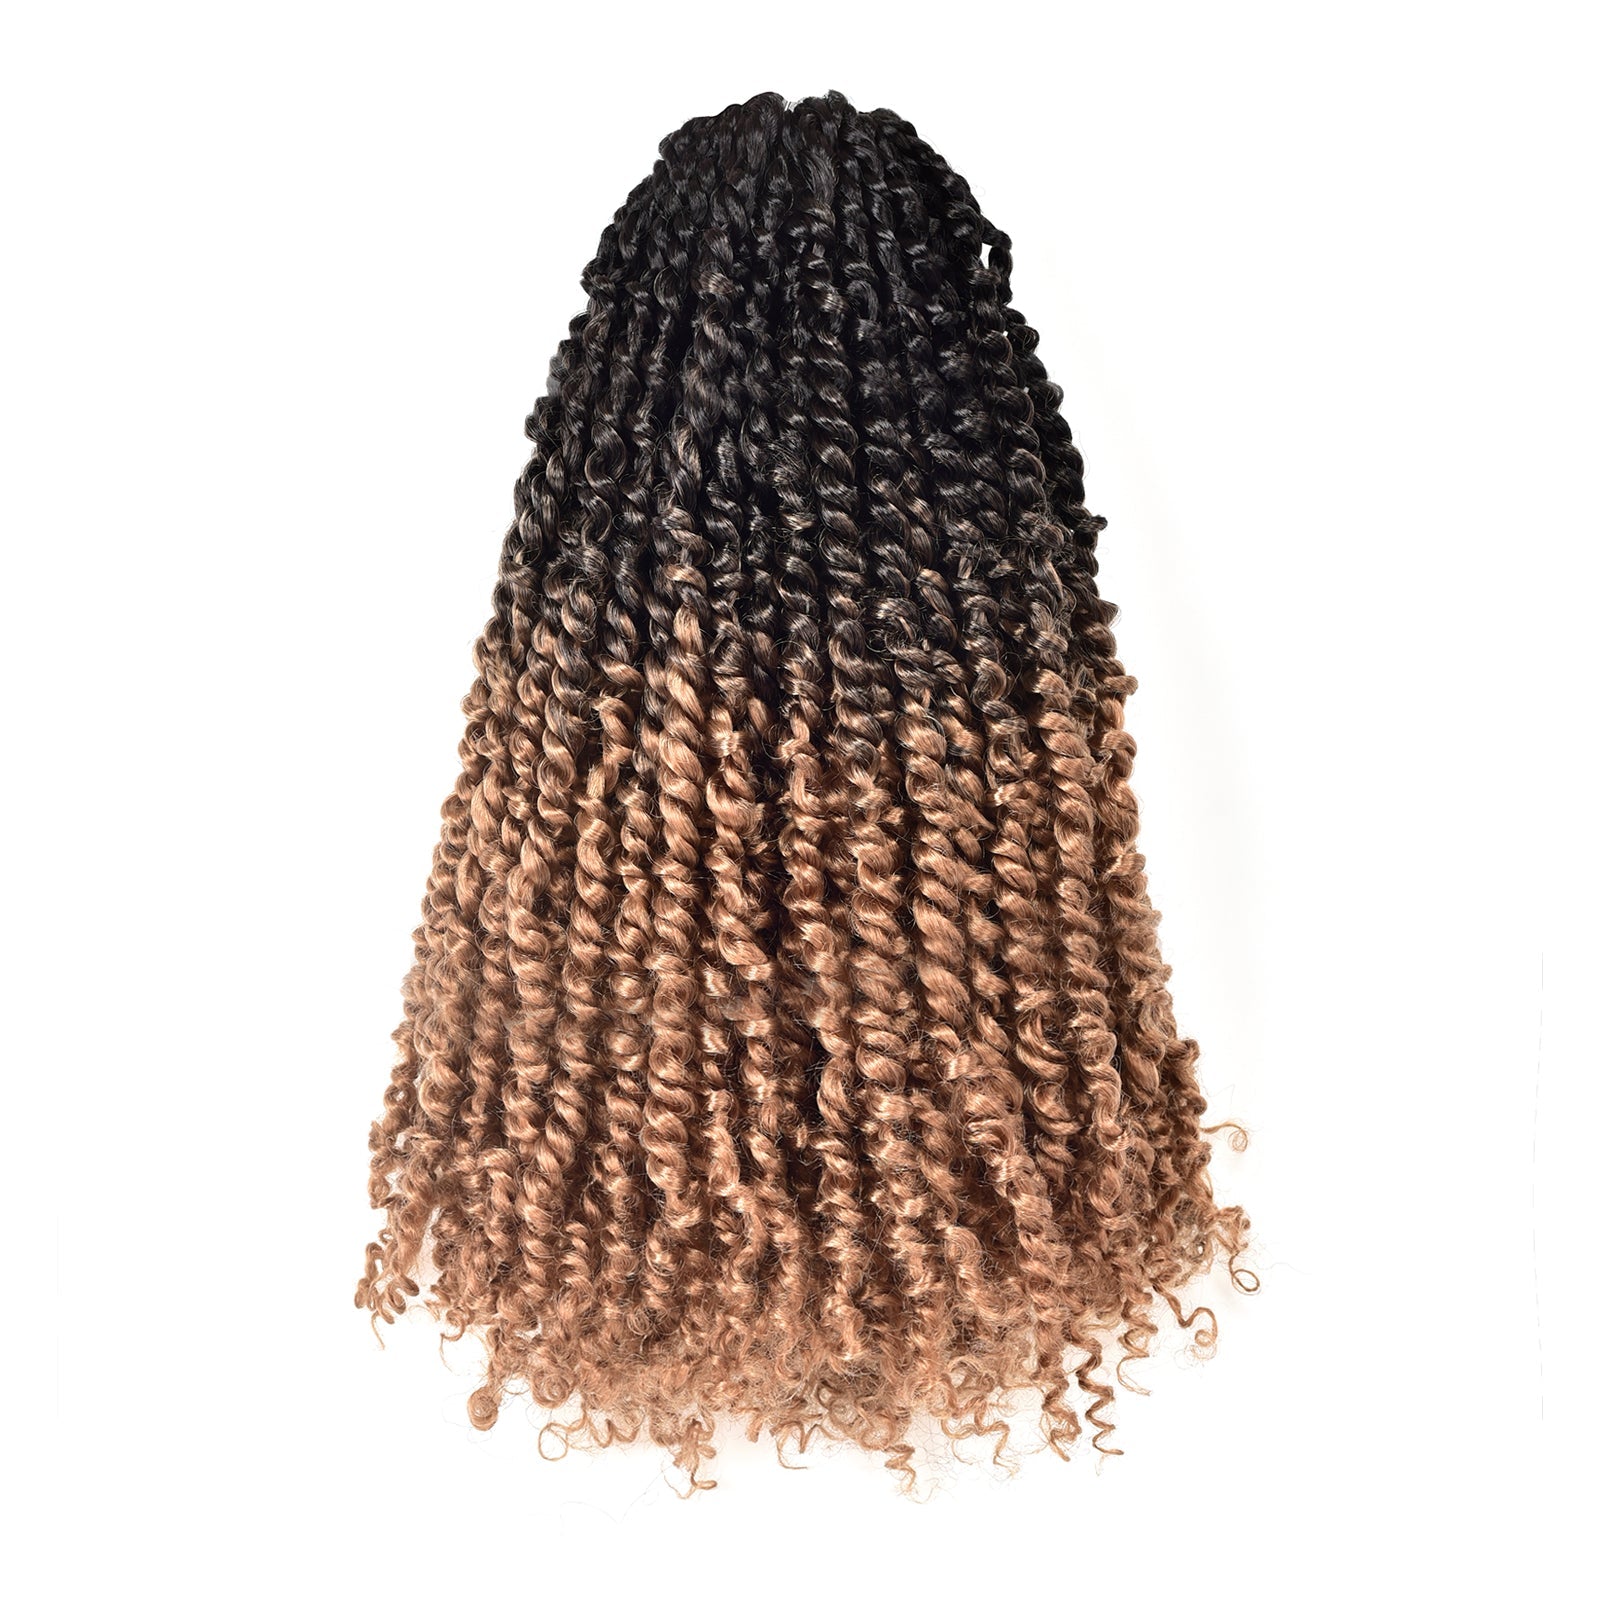 OUTLET DEAL | Tiana Passion Twist 16